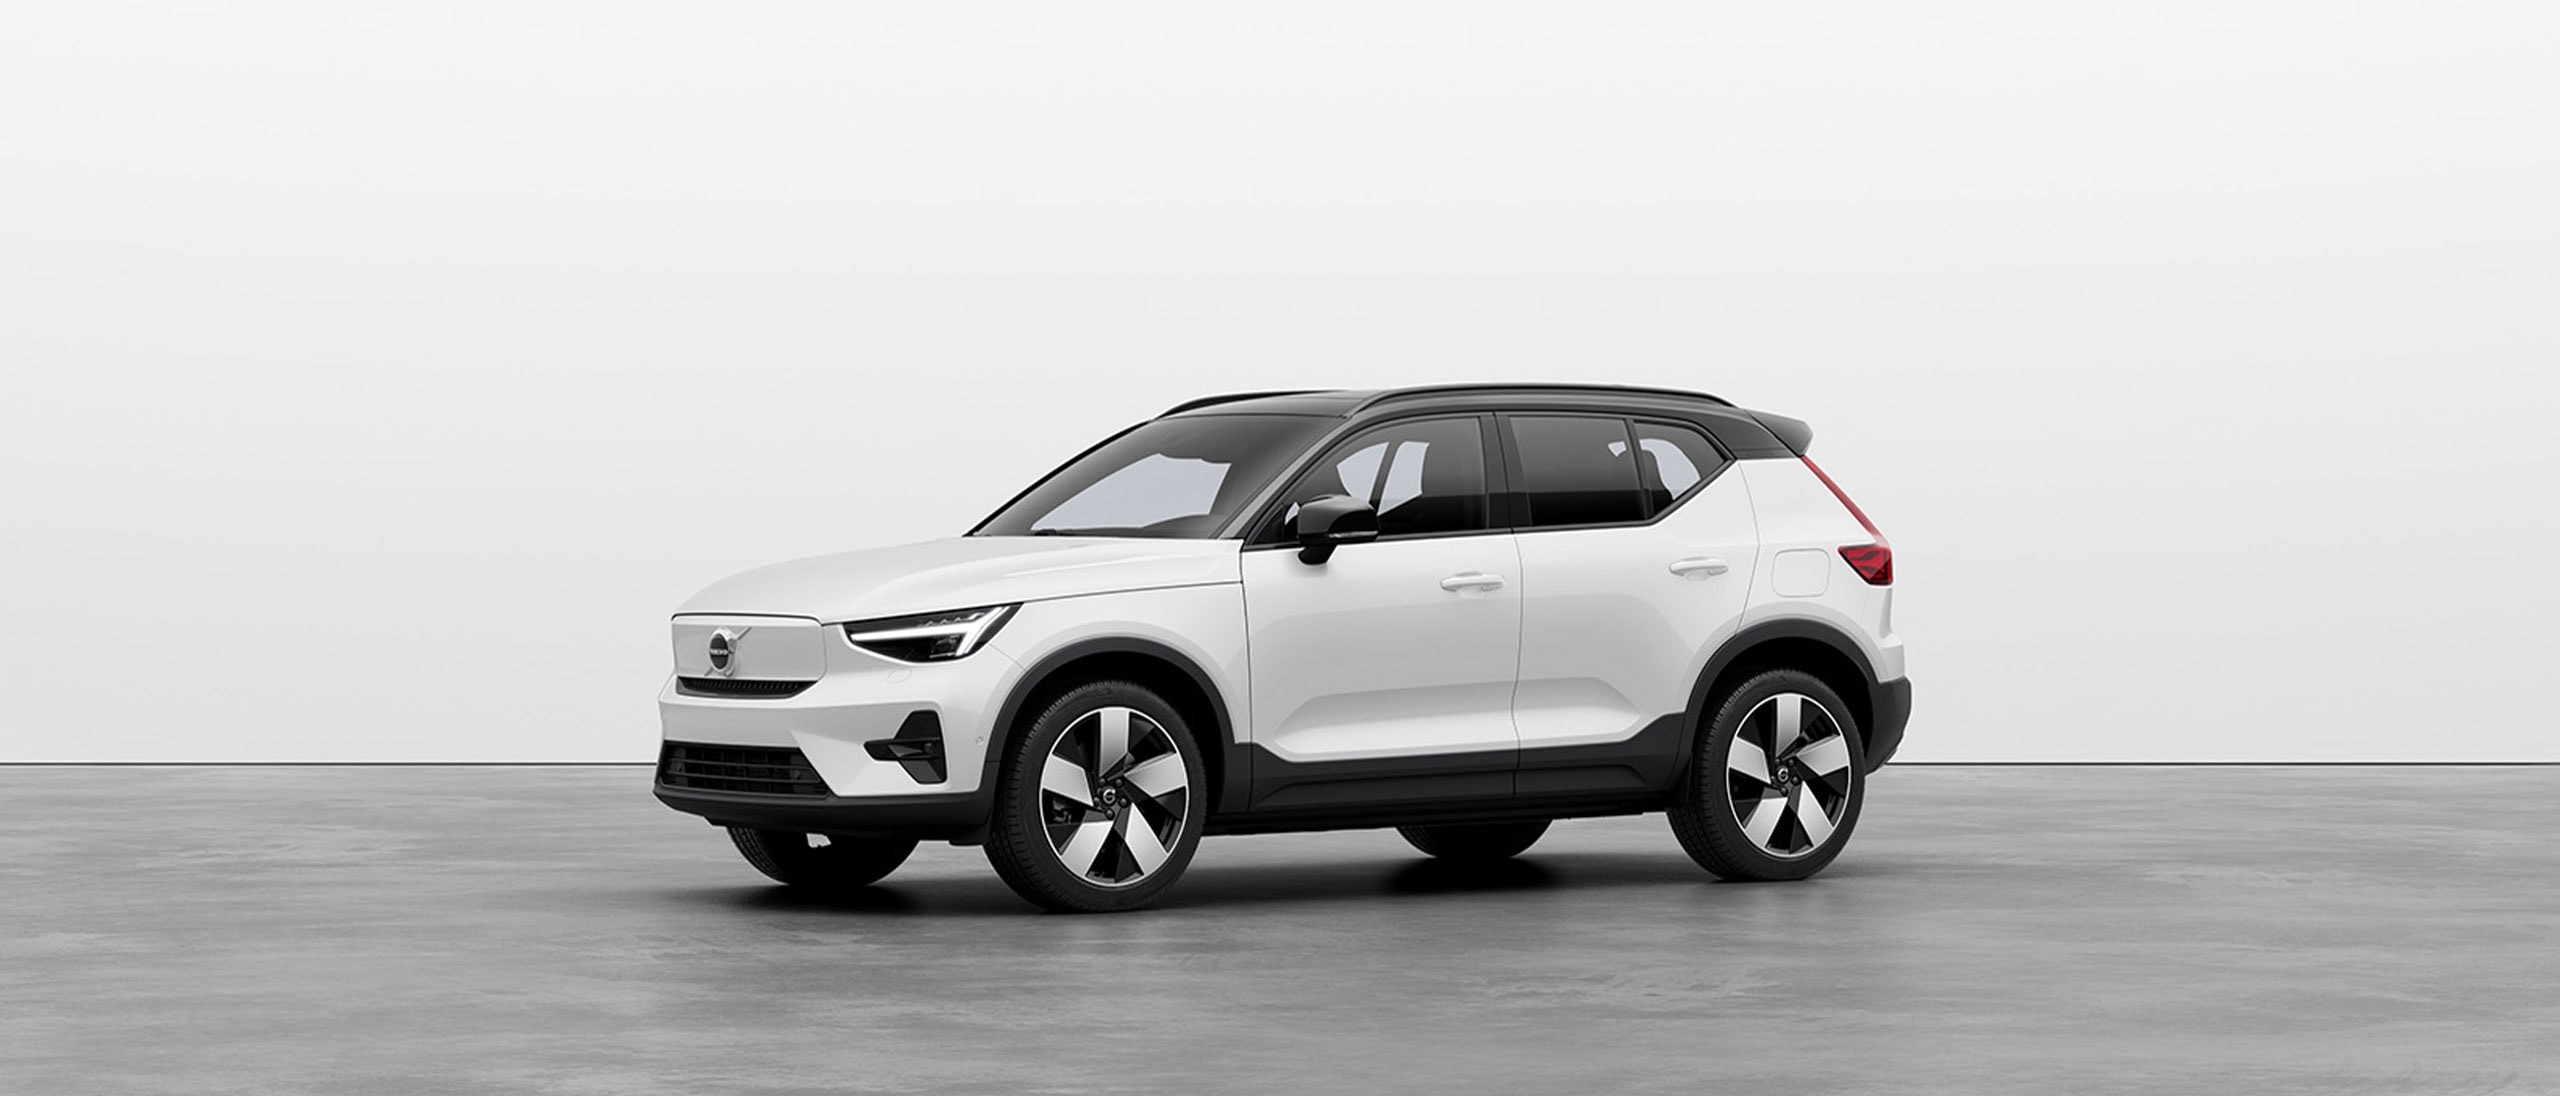 XC40 Recharge pure electric specifications | Volvo Cars